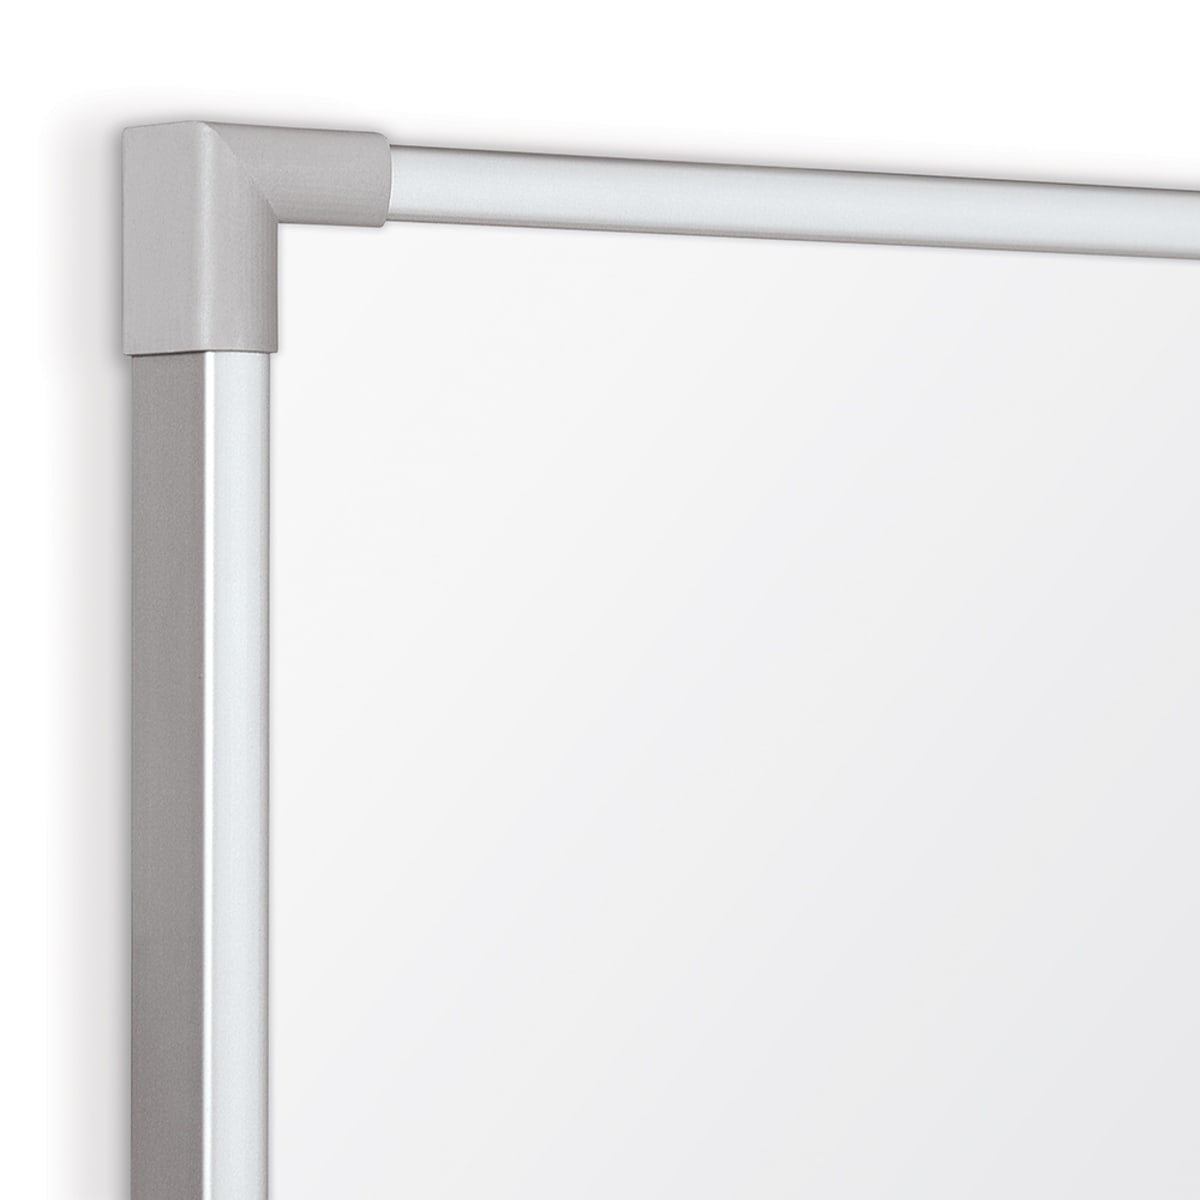 Mooreco Ultra Trim - Porcelain Markerboard Silver - 2'H x 3'W (Mooreco 2029B) - SchoolOutlet